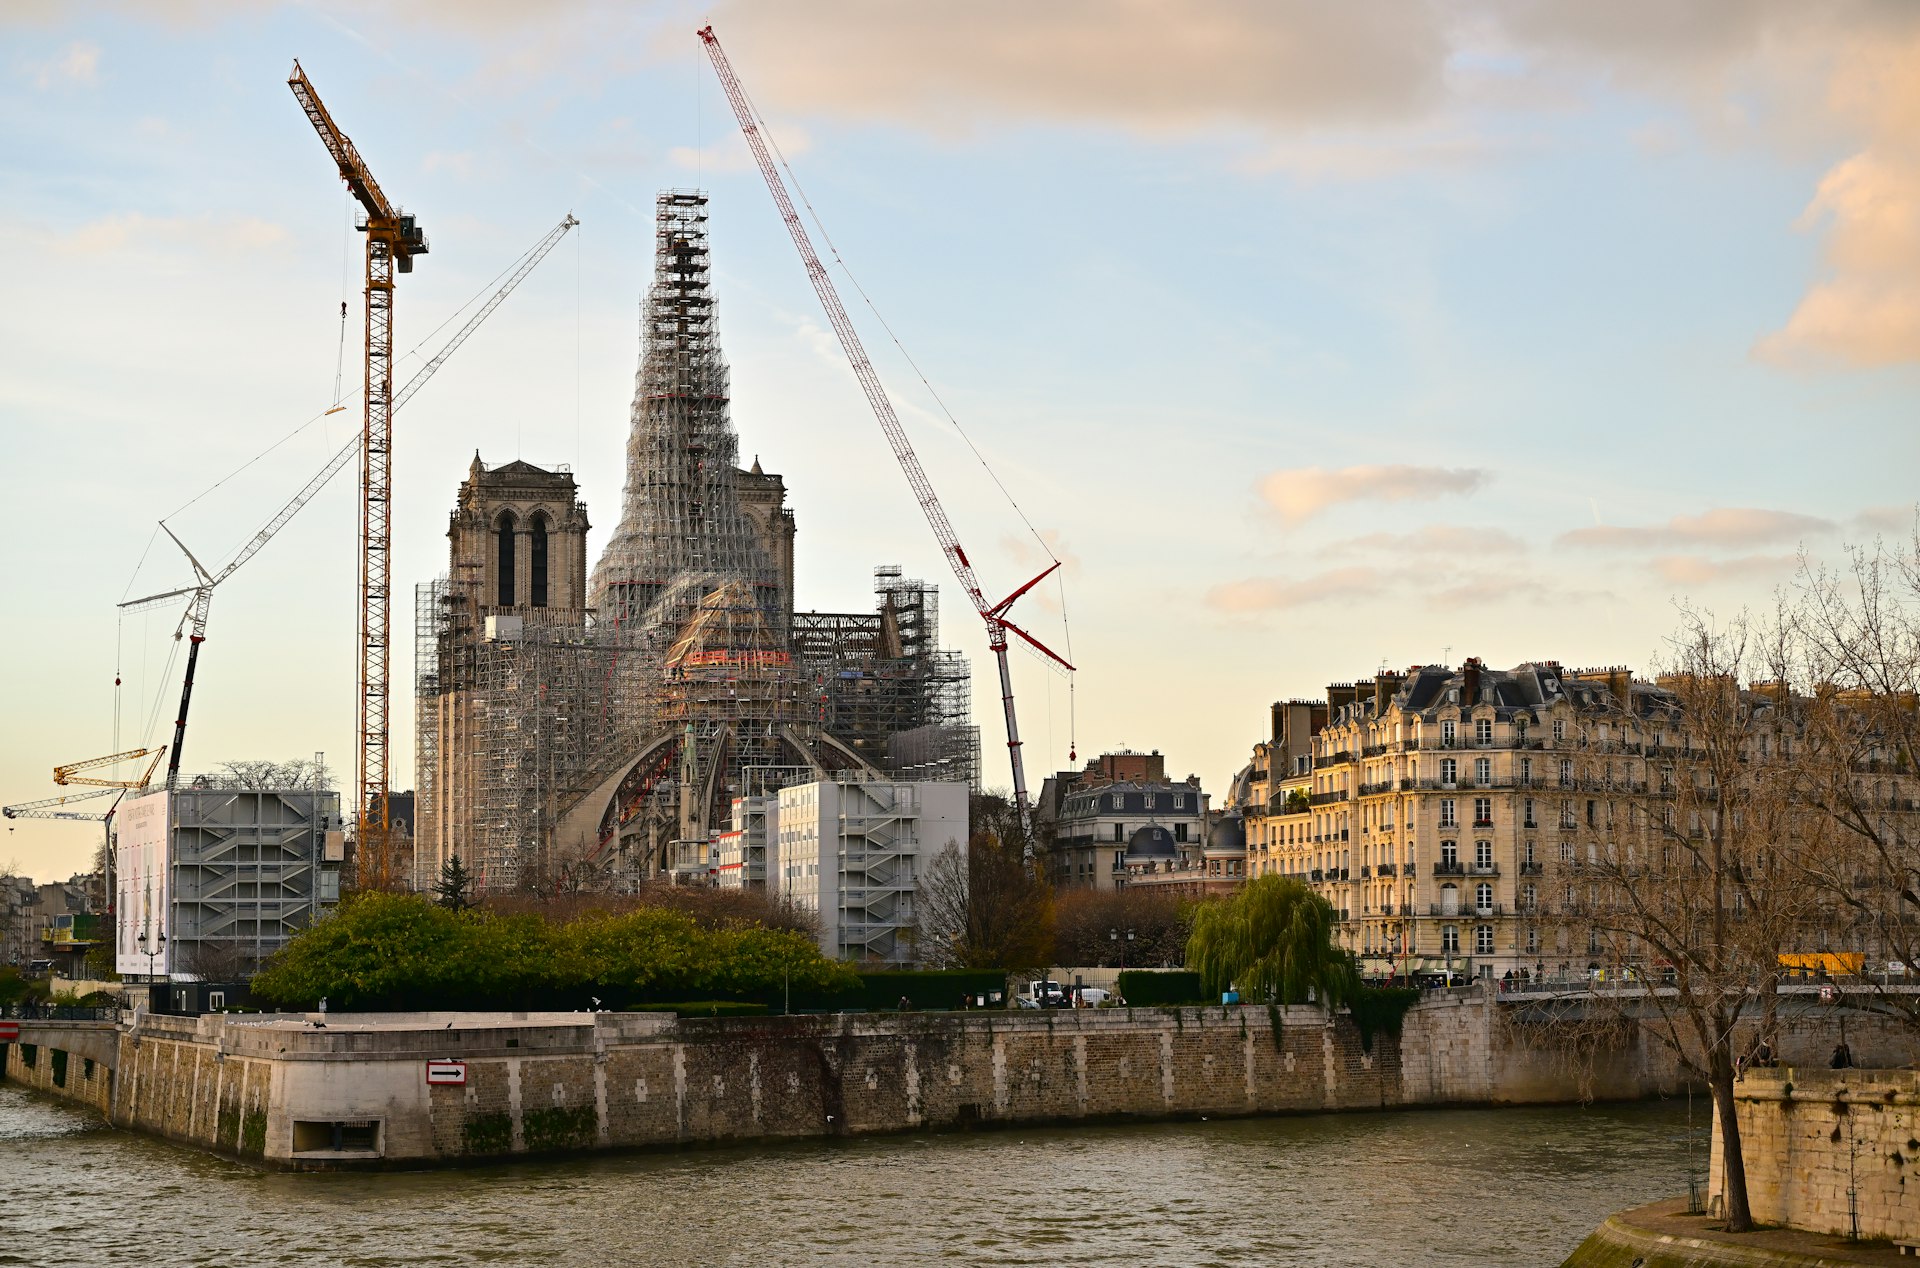 Notre-Dame Cathedral in Paris with renovations taking place